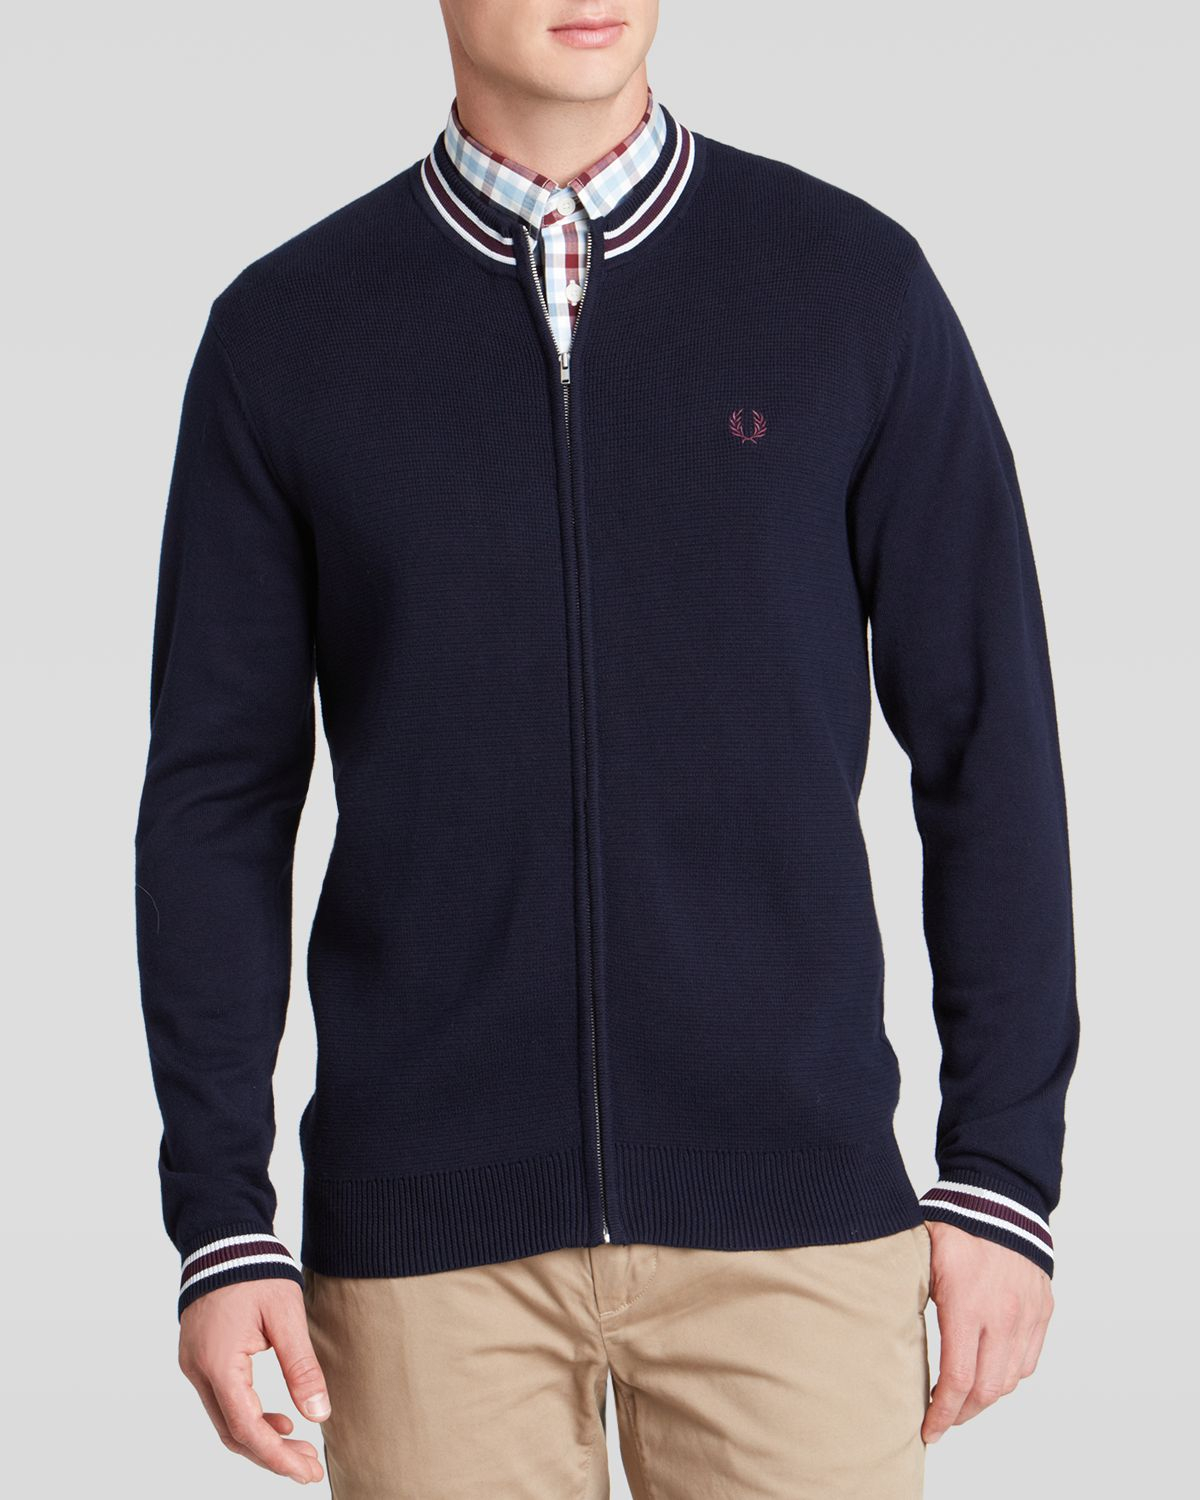 Lyst - Fred Perry Vintage Sport Zip Cardigan in Blue for Men